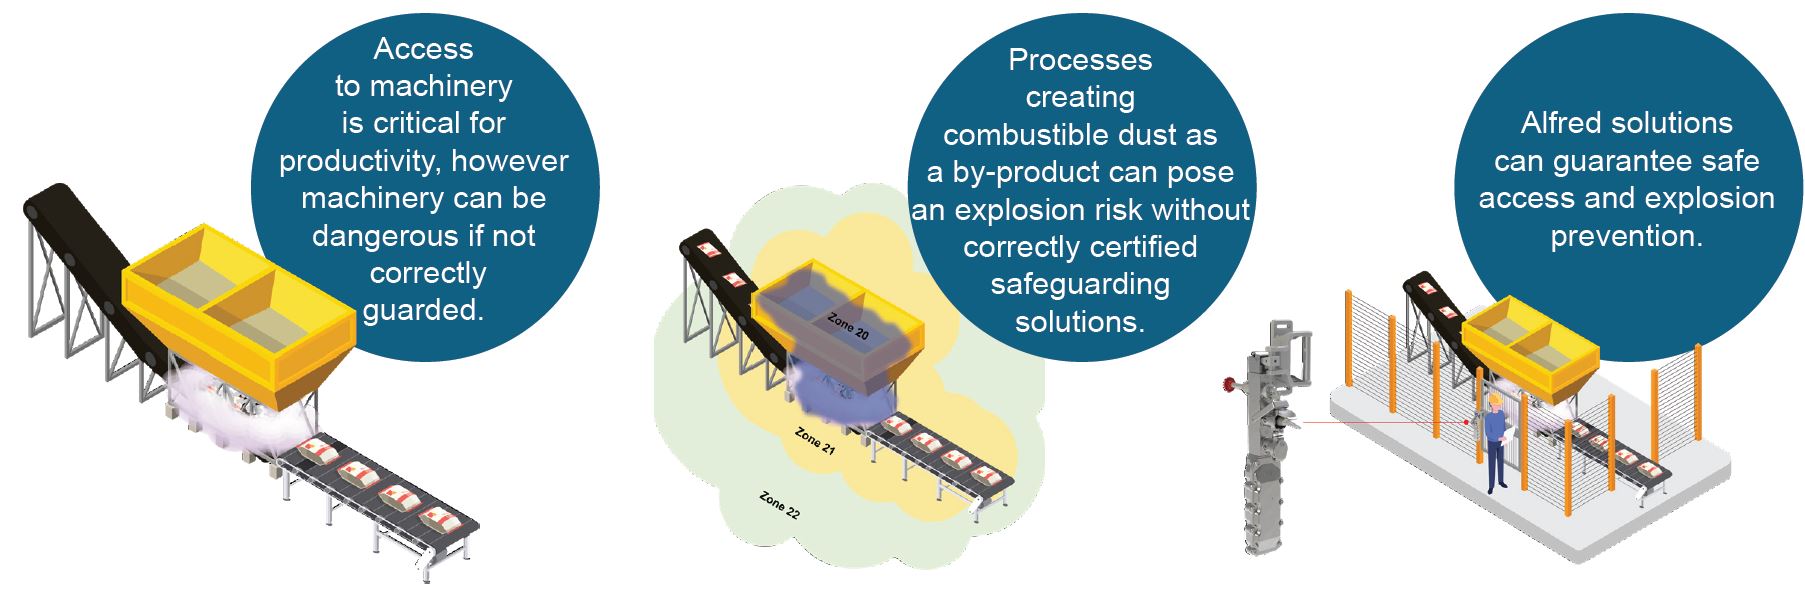 Machinery Safety in Explosive Atmospheres and Hazardous Locations là gì?